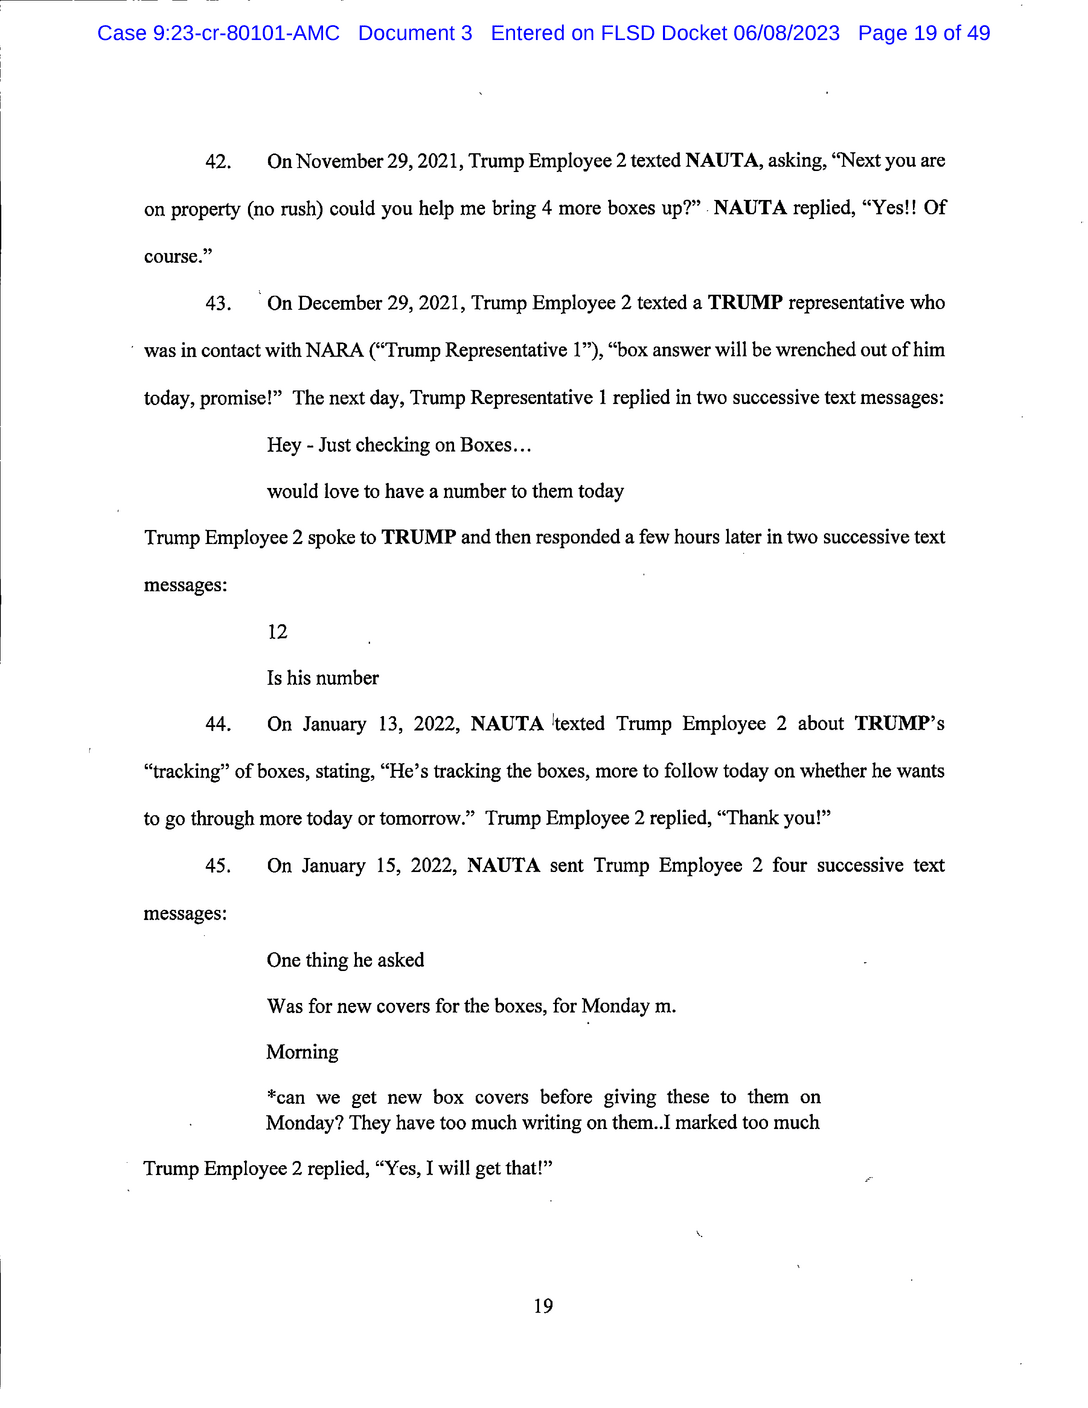 Page 19 of Donald Trump Classified Documents Indictment PDF document.